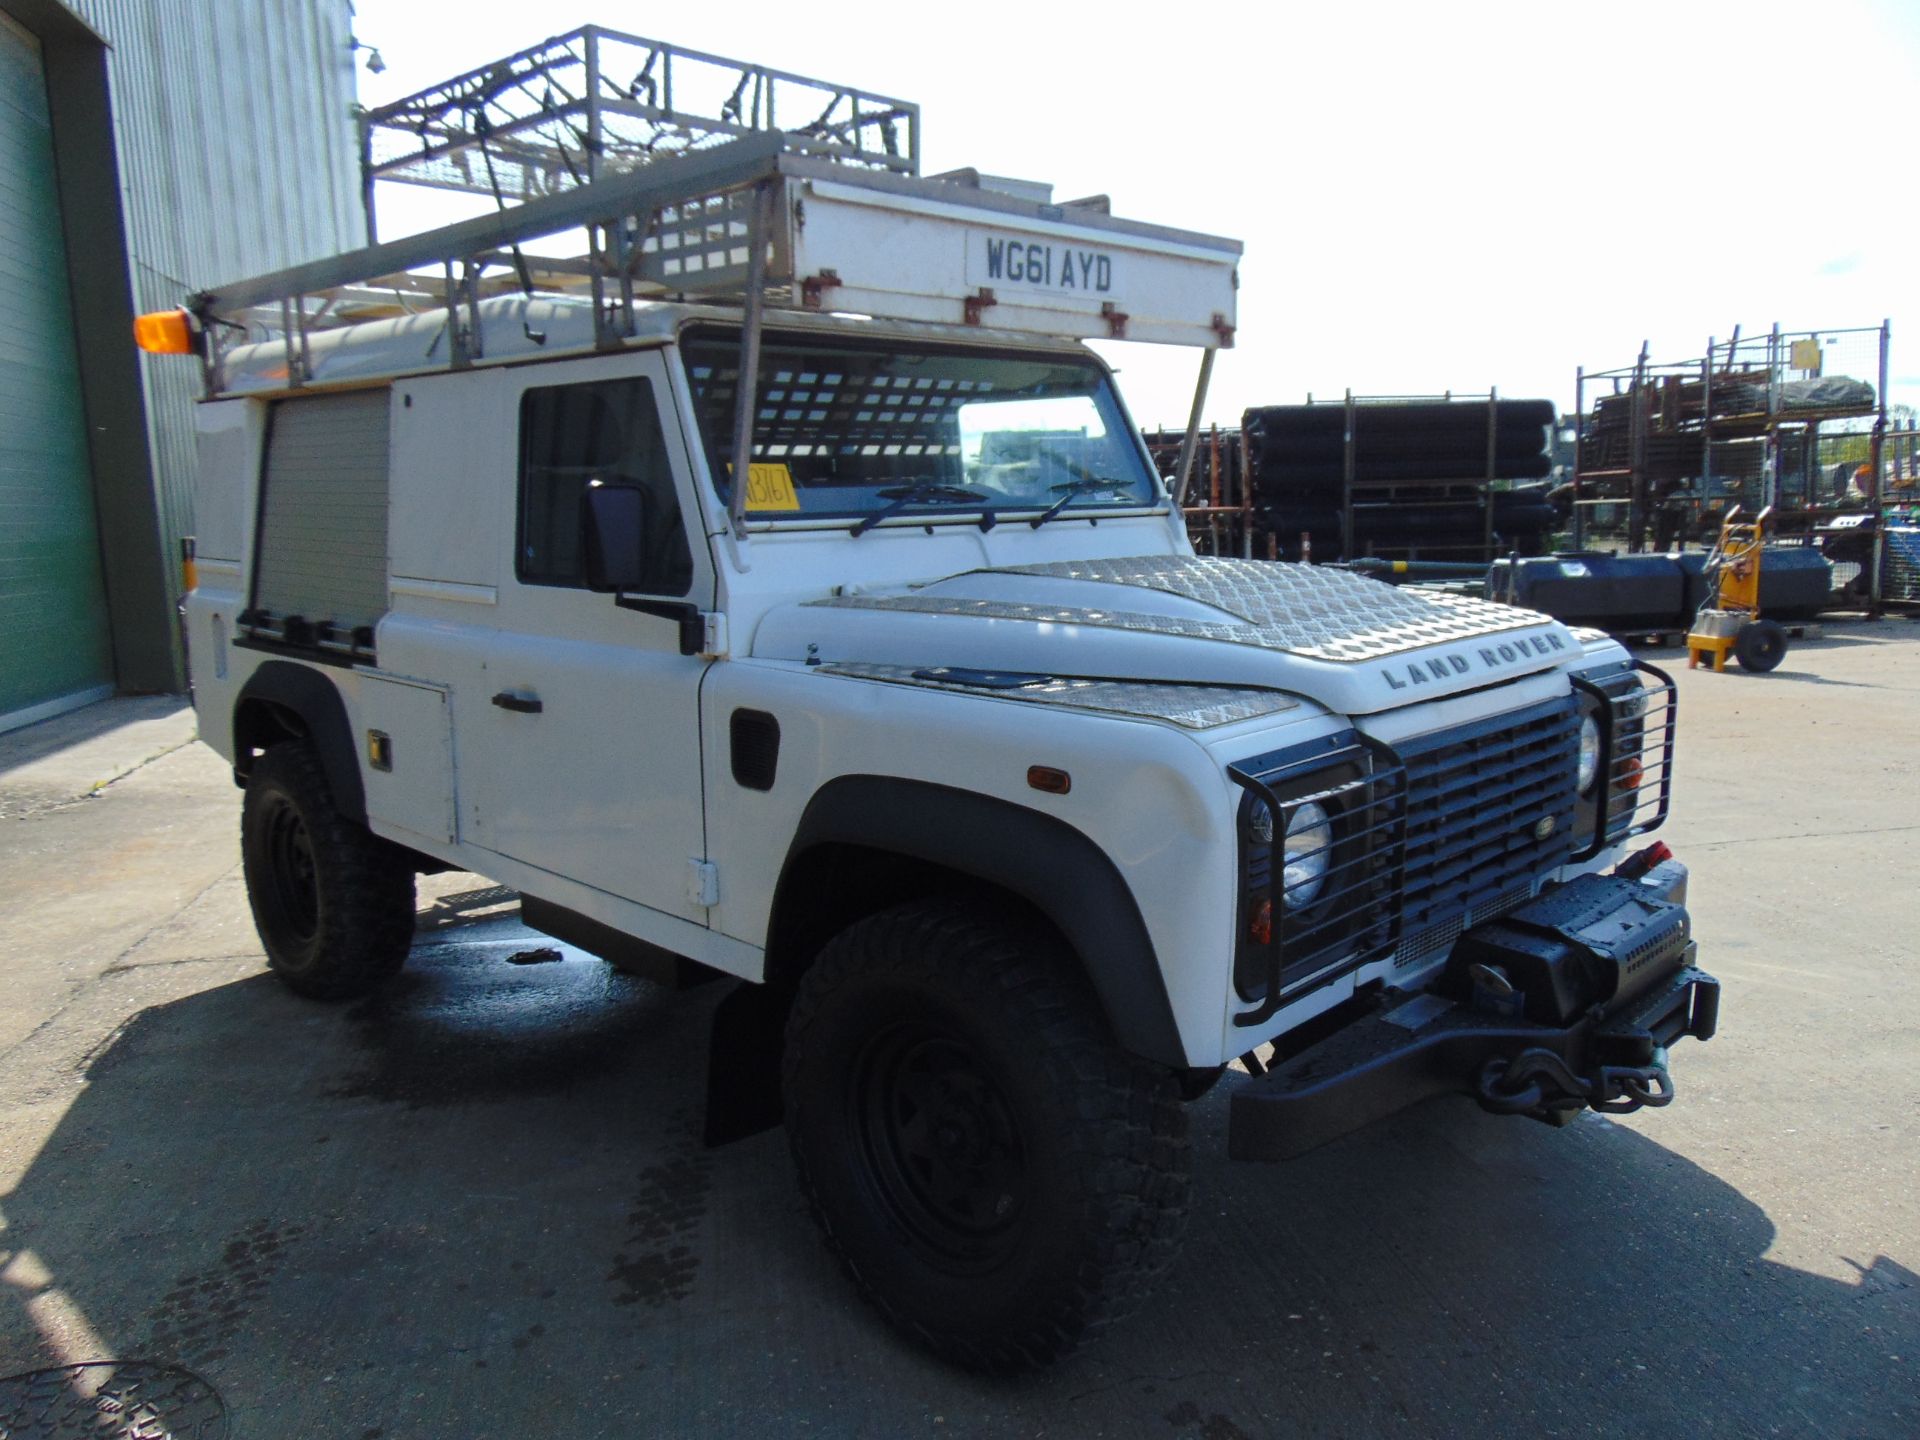 2011 Land Rover Defender 110 Puma hardtop 4x4 Utility vehicle (mobile workshop) with hydraulic winch - Image 5 of 53